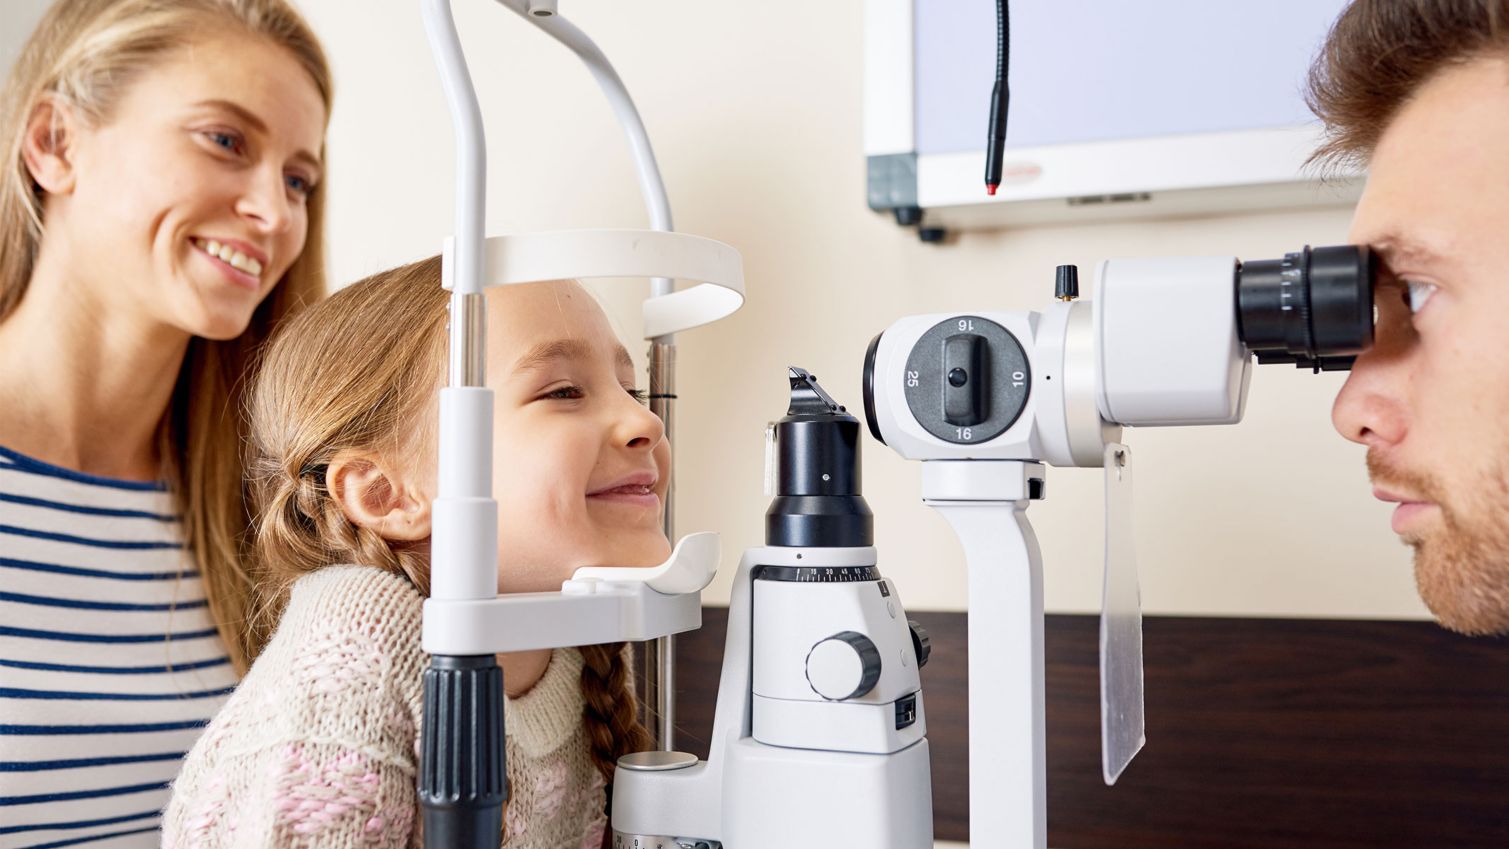 A child gets an eye exam while her mom looks on.